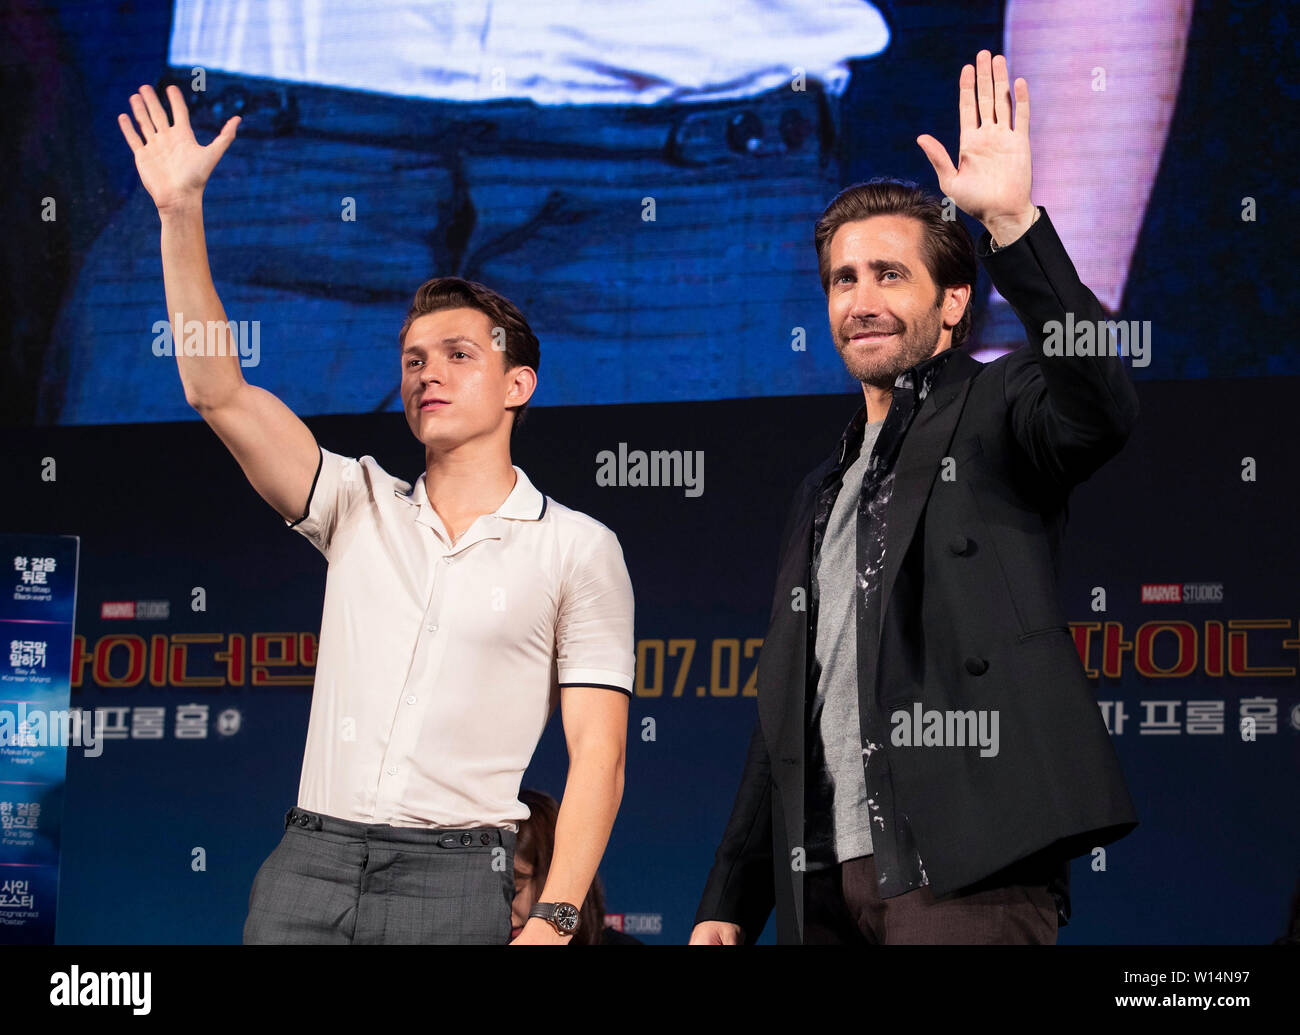 Seoul, South Korea. 30th June, 2019. Actors Tom Holland (L) and Jake Gyllenhaal greet fans during a press conference of the film 'Spider-Man: Far From Home' in Seoul, South Korea, June 30, 2019. The movie will be released in South Korea on July 2. Credit: Lee Sang-ho/Xinhua/Alamy Live News Stock Photo